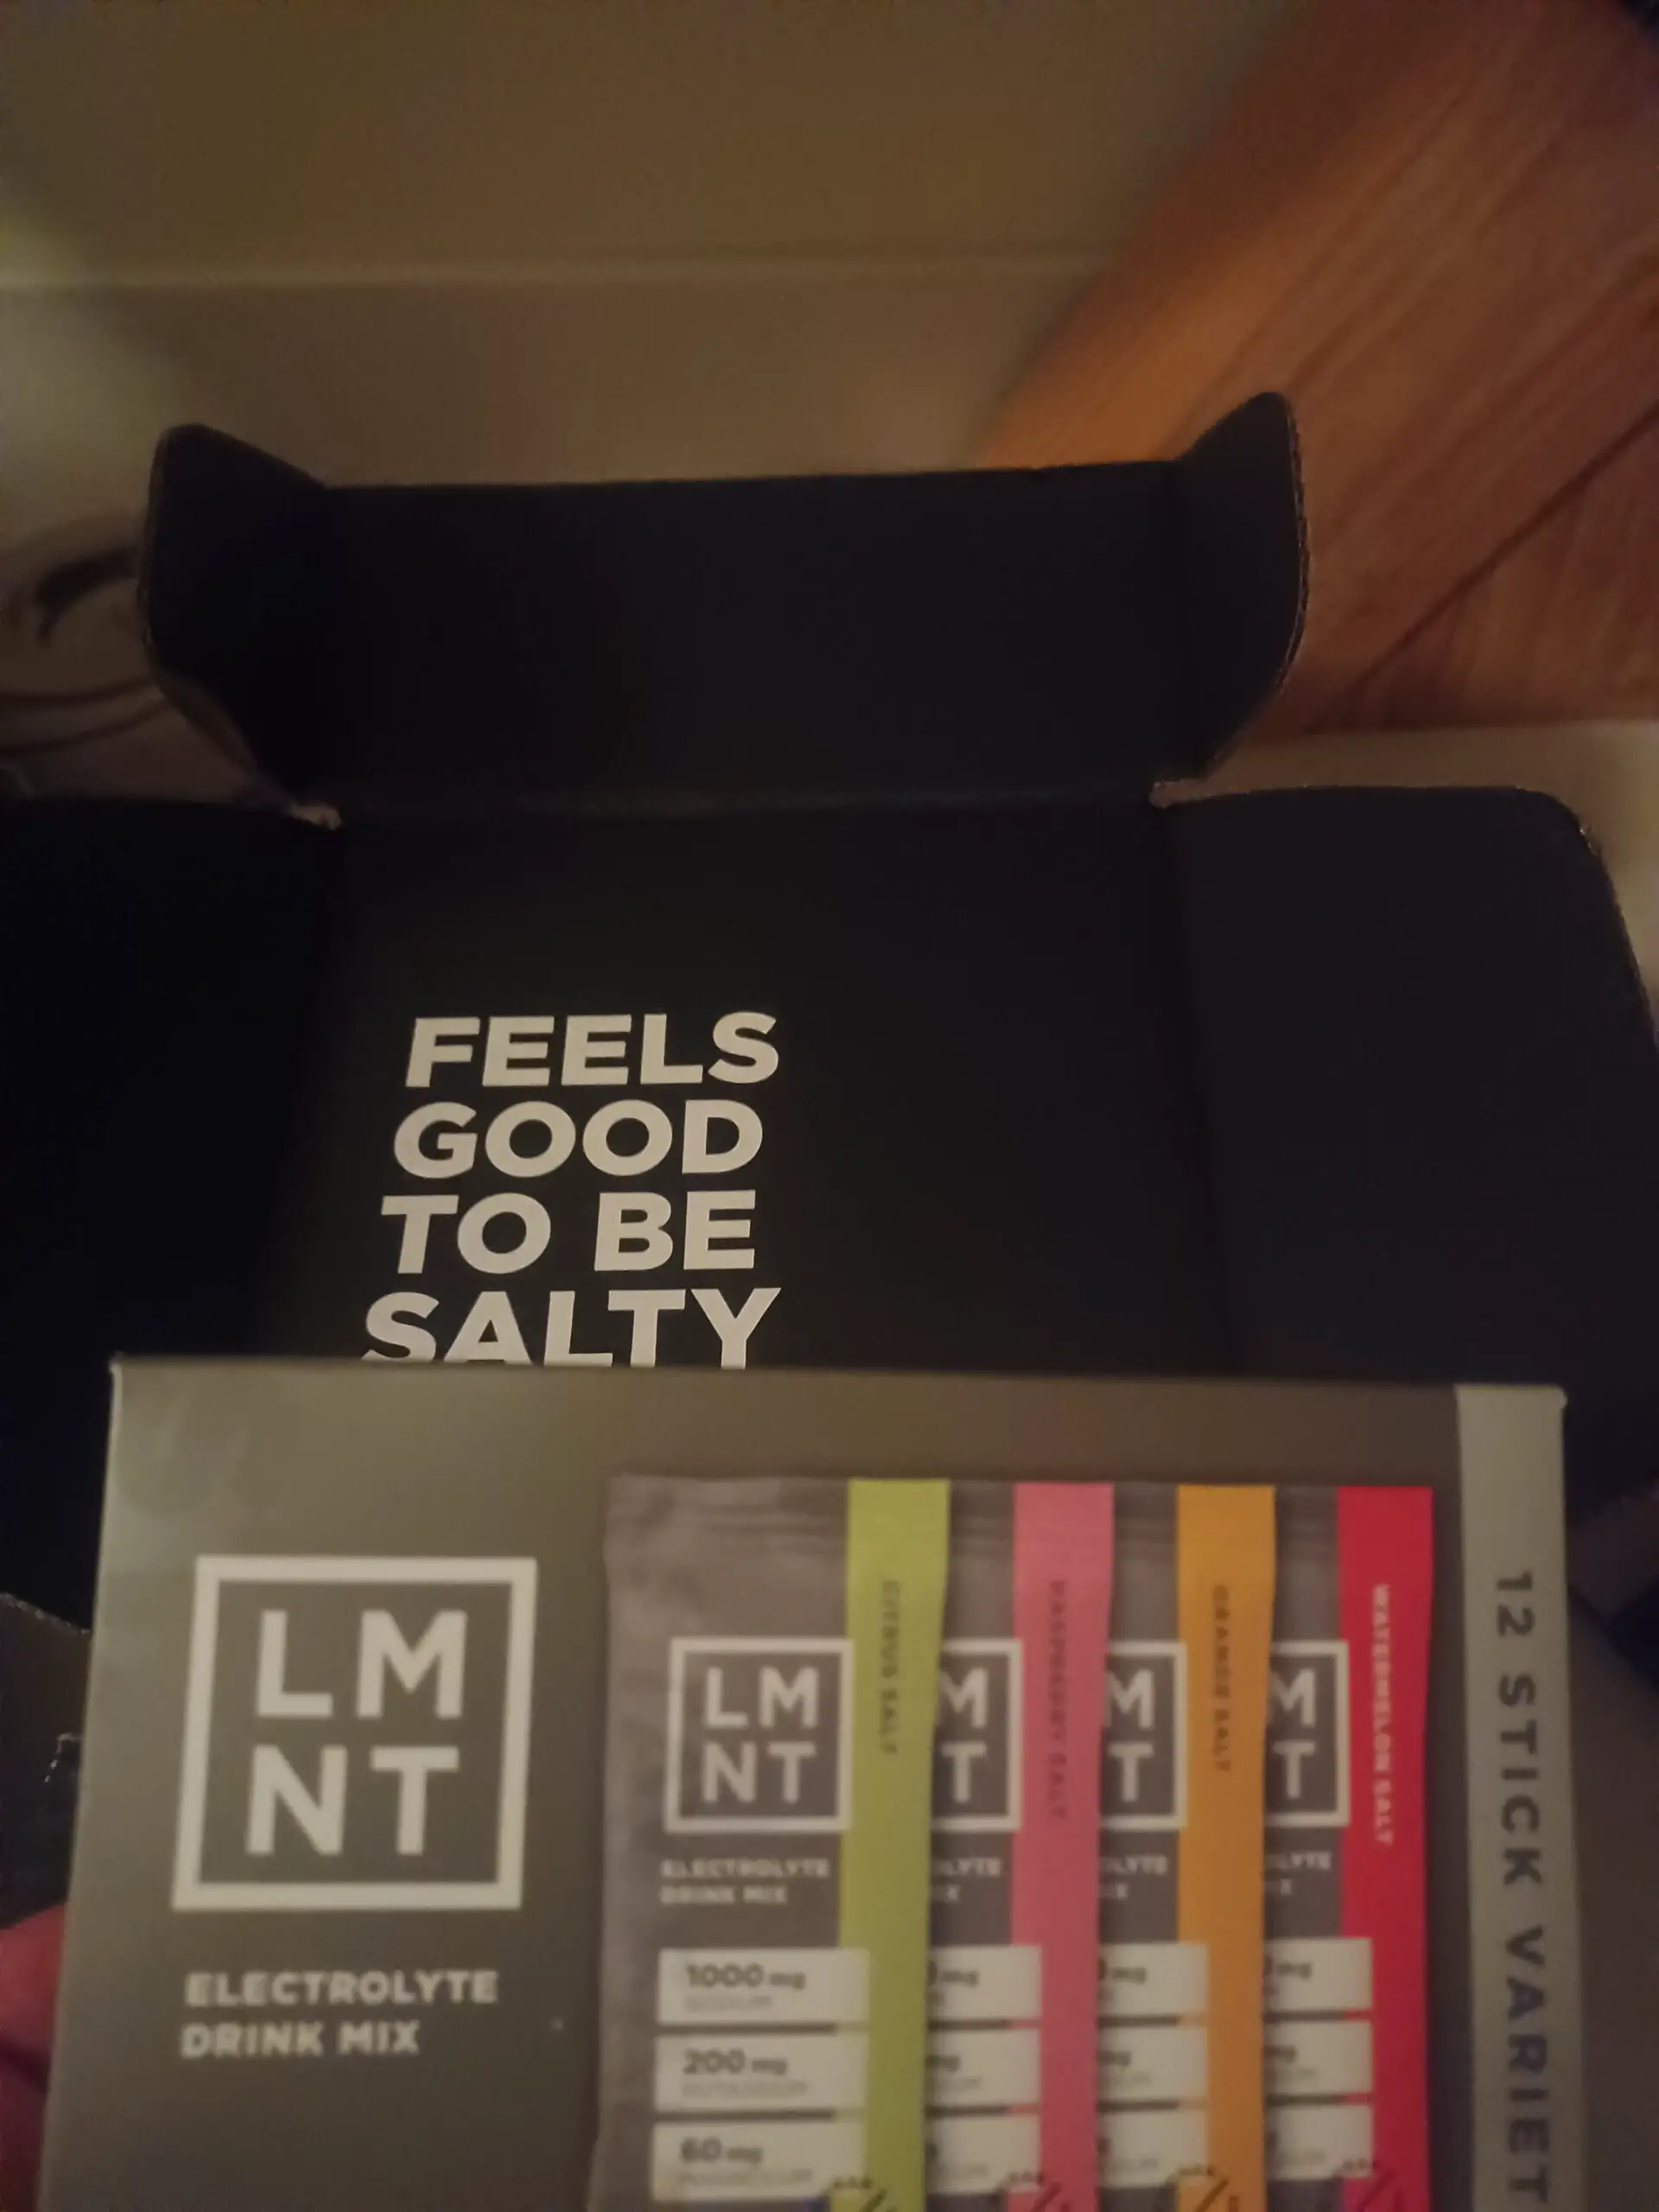 LMNT 'Salty' Electrolytes review.